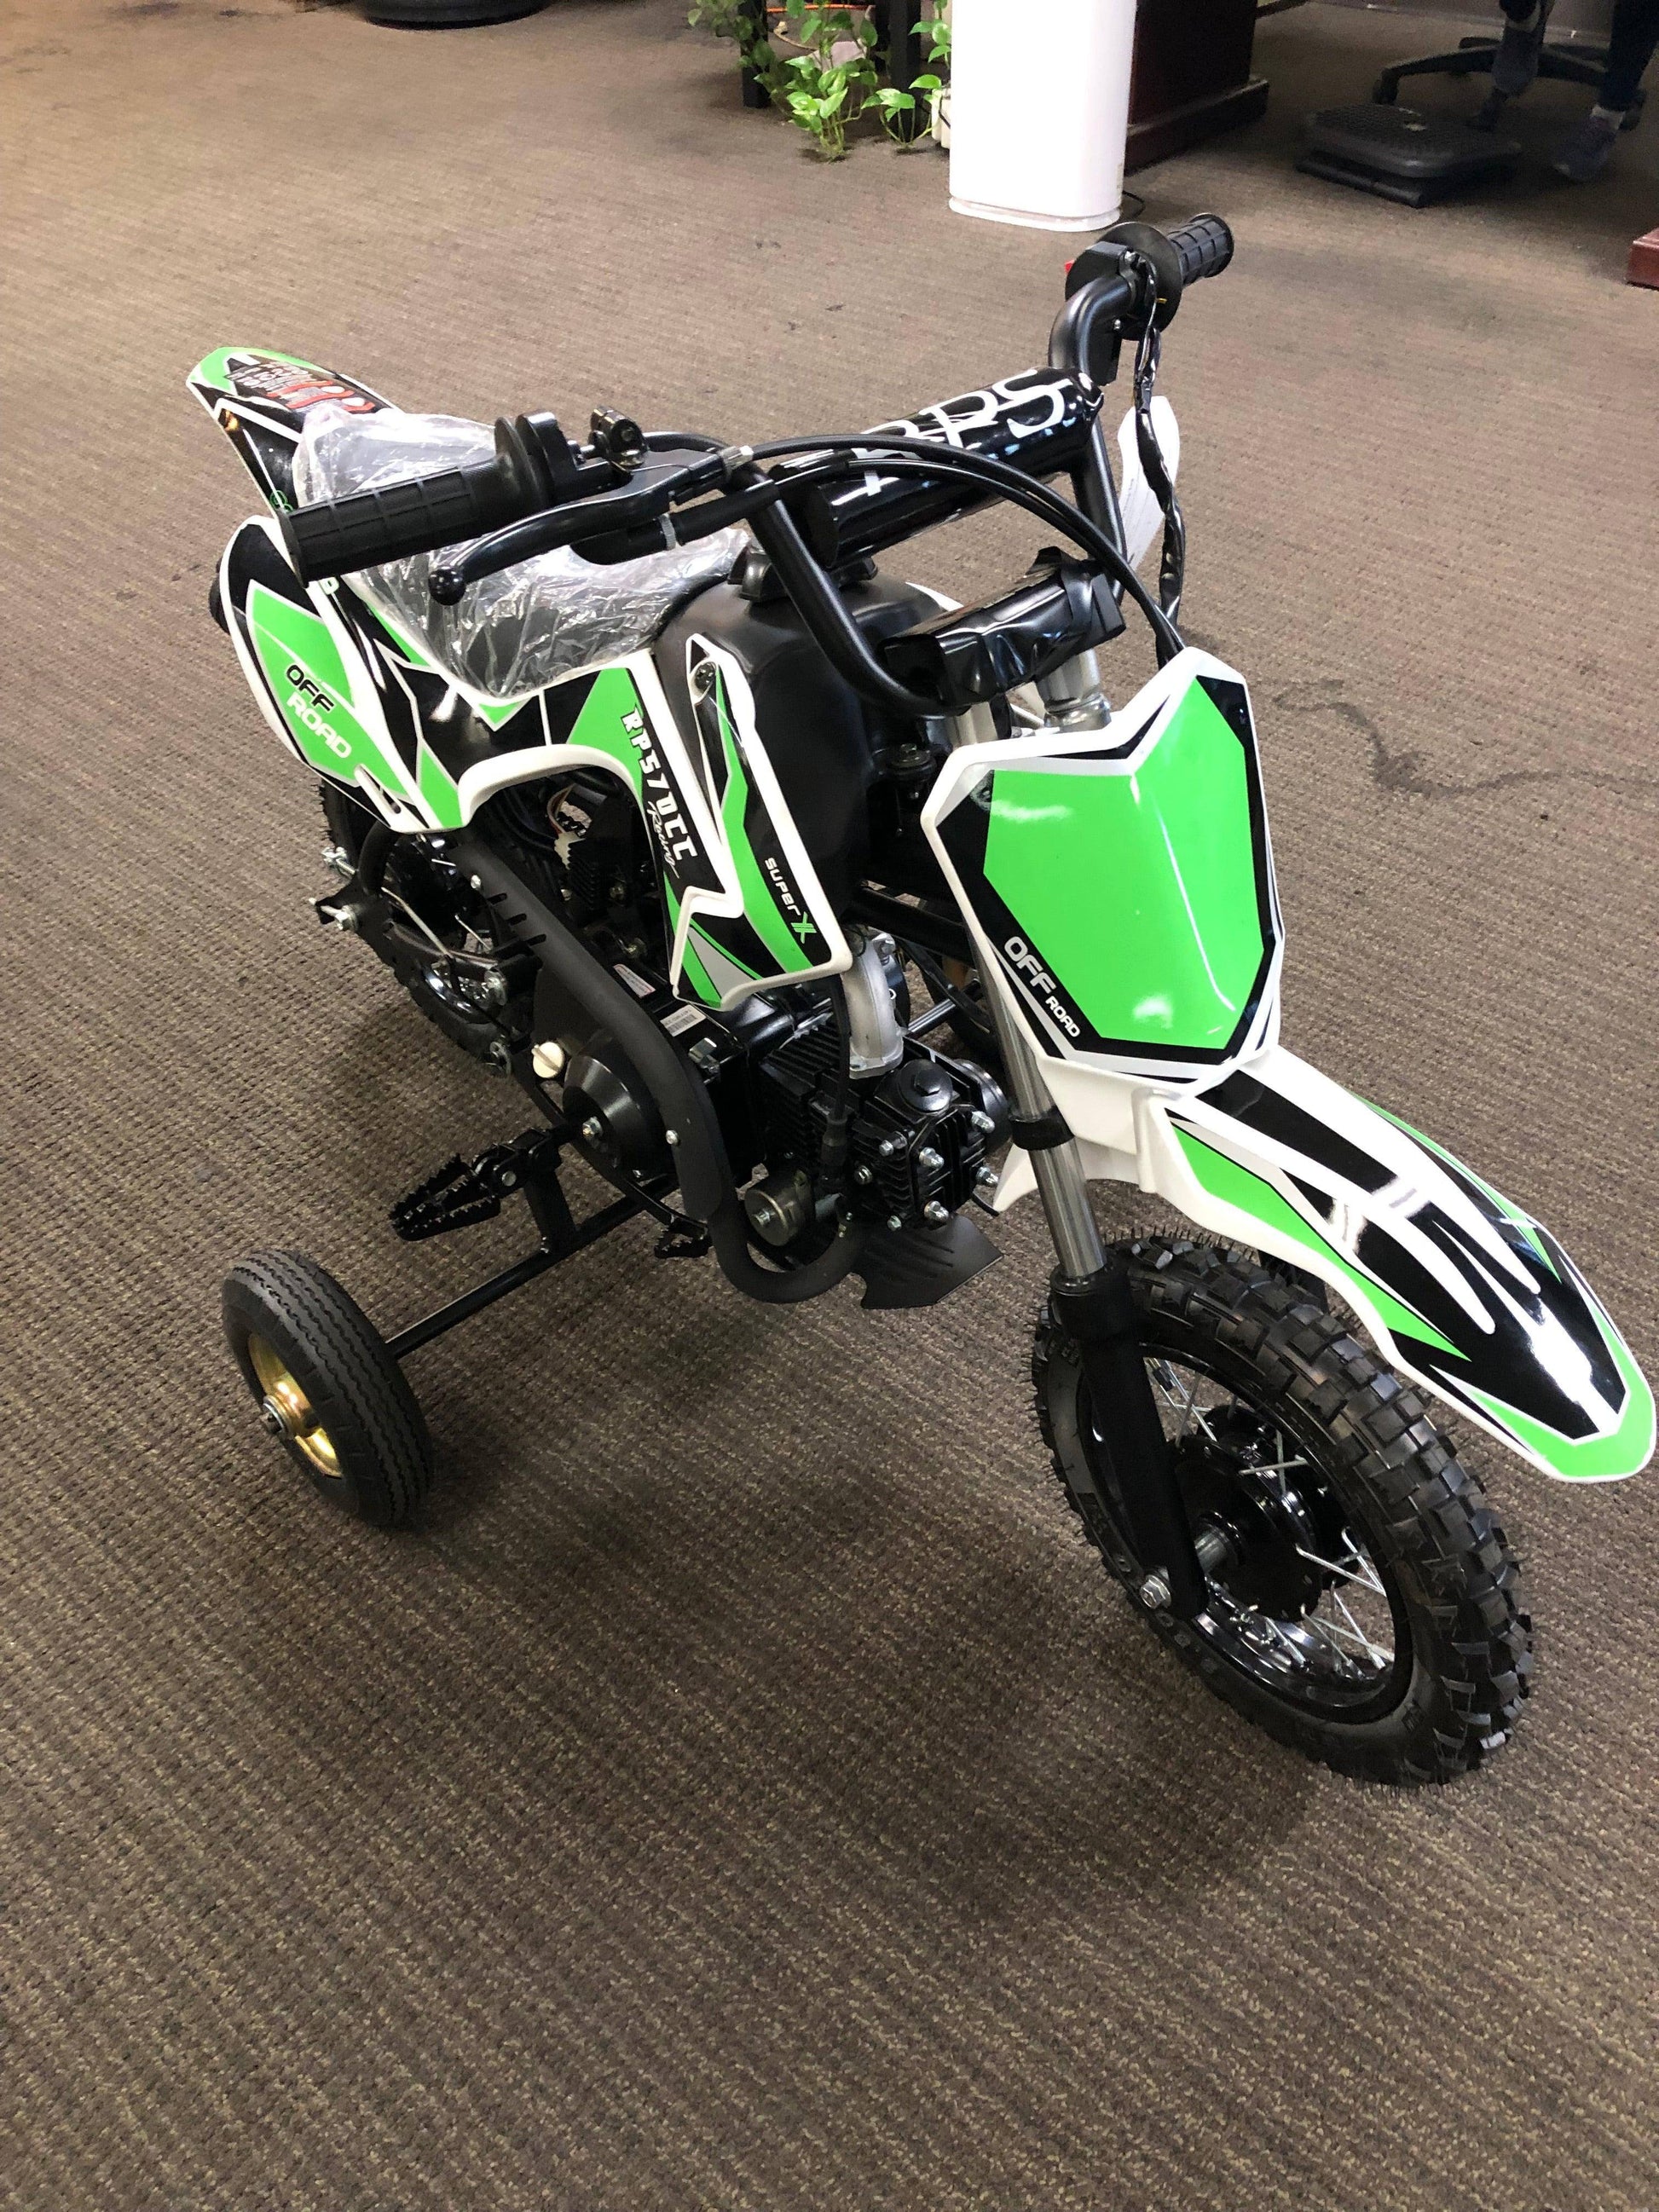 RPS small 70cc Dirt Bike for kids with training wheels - Q9 PowerSports USA